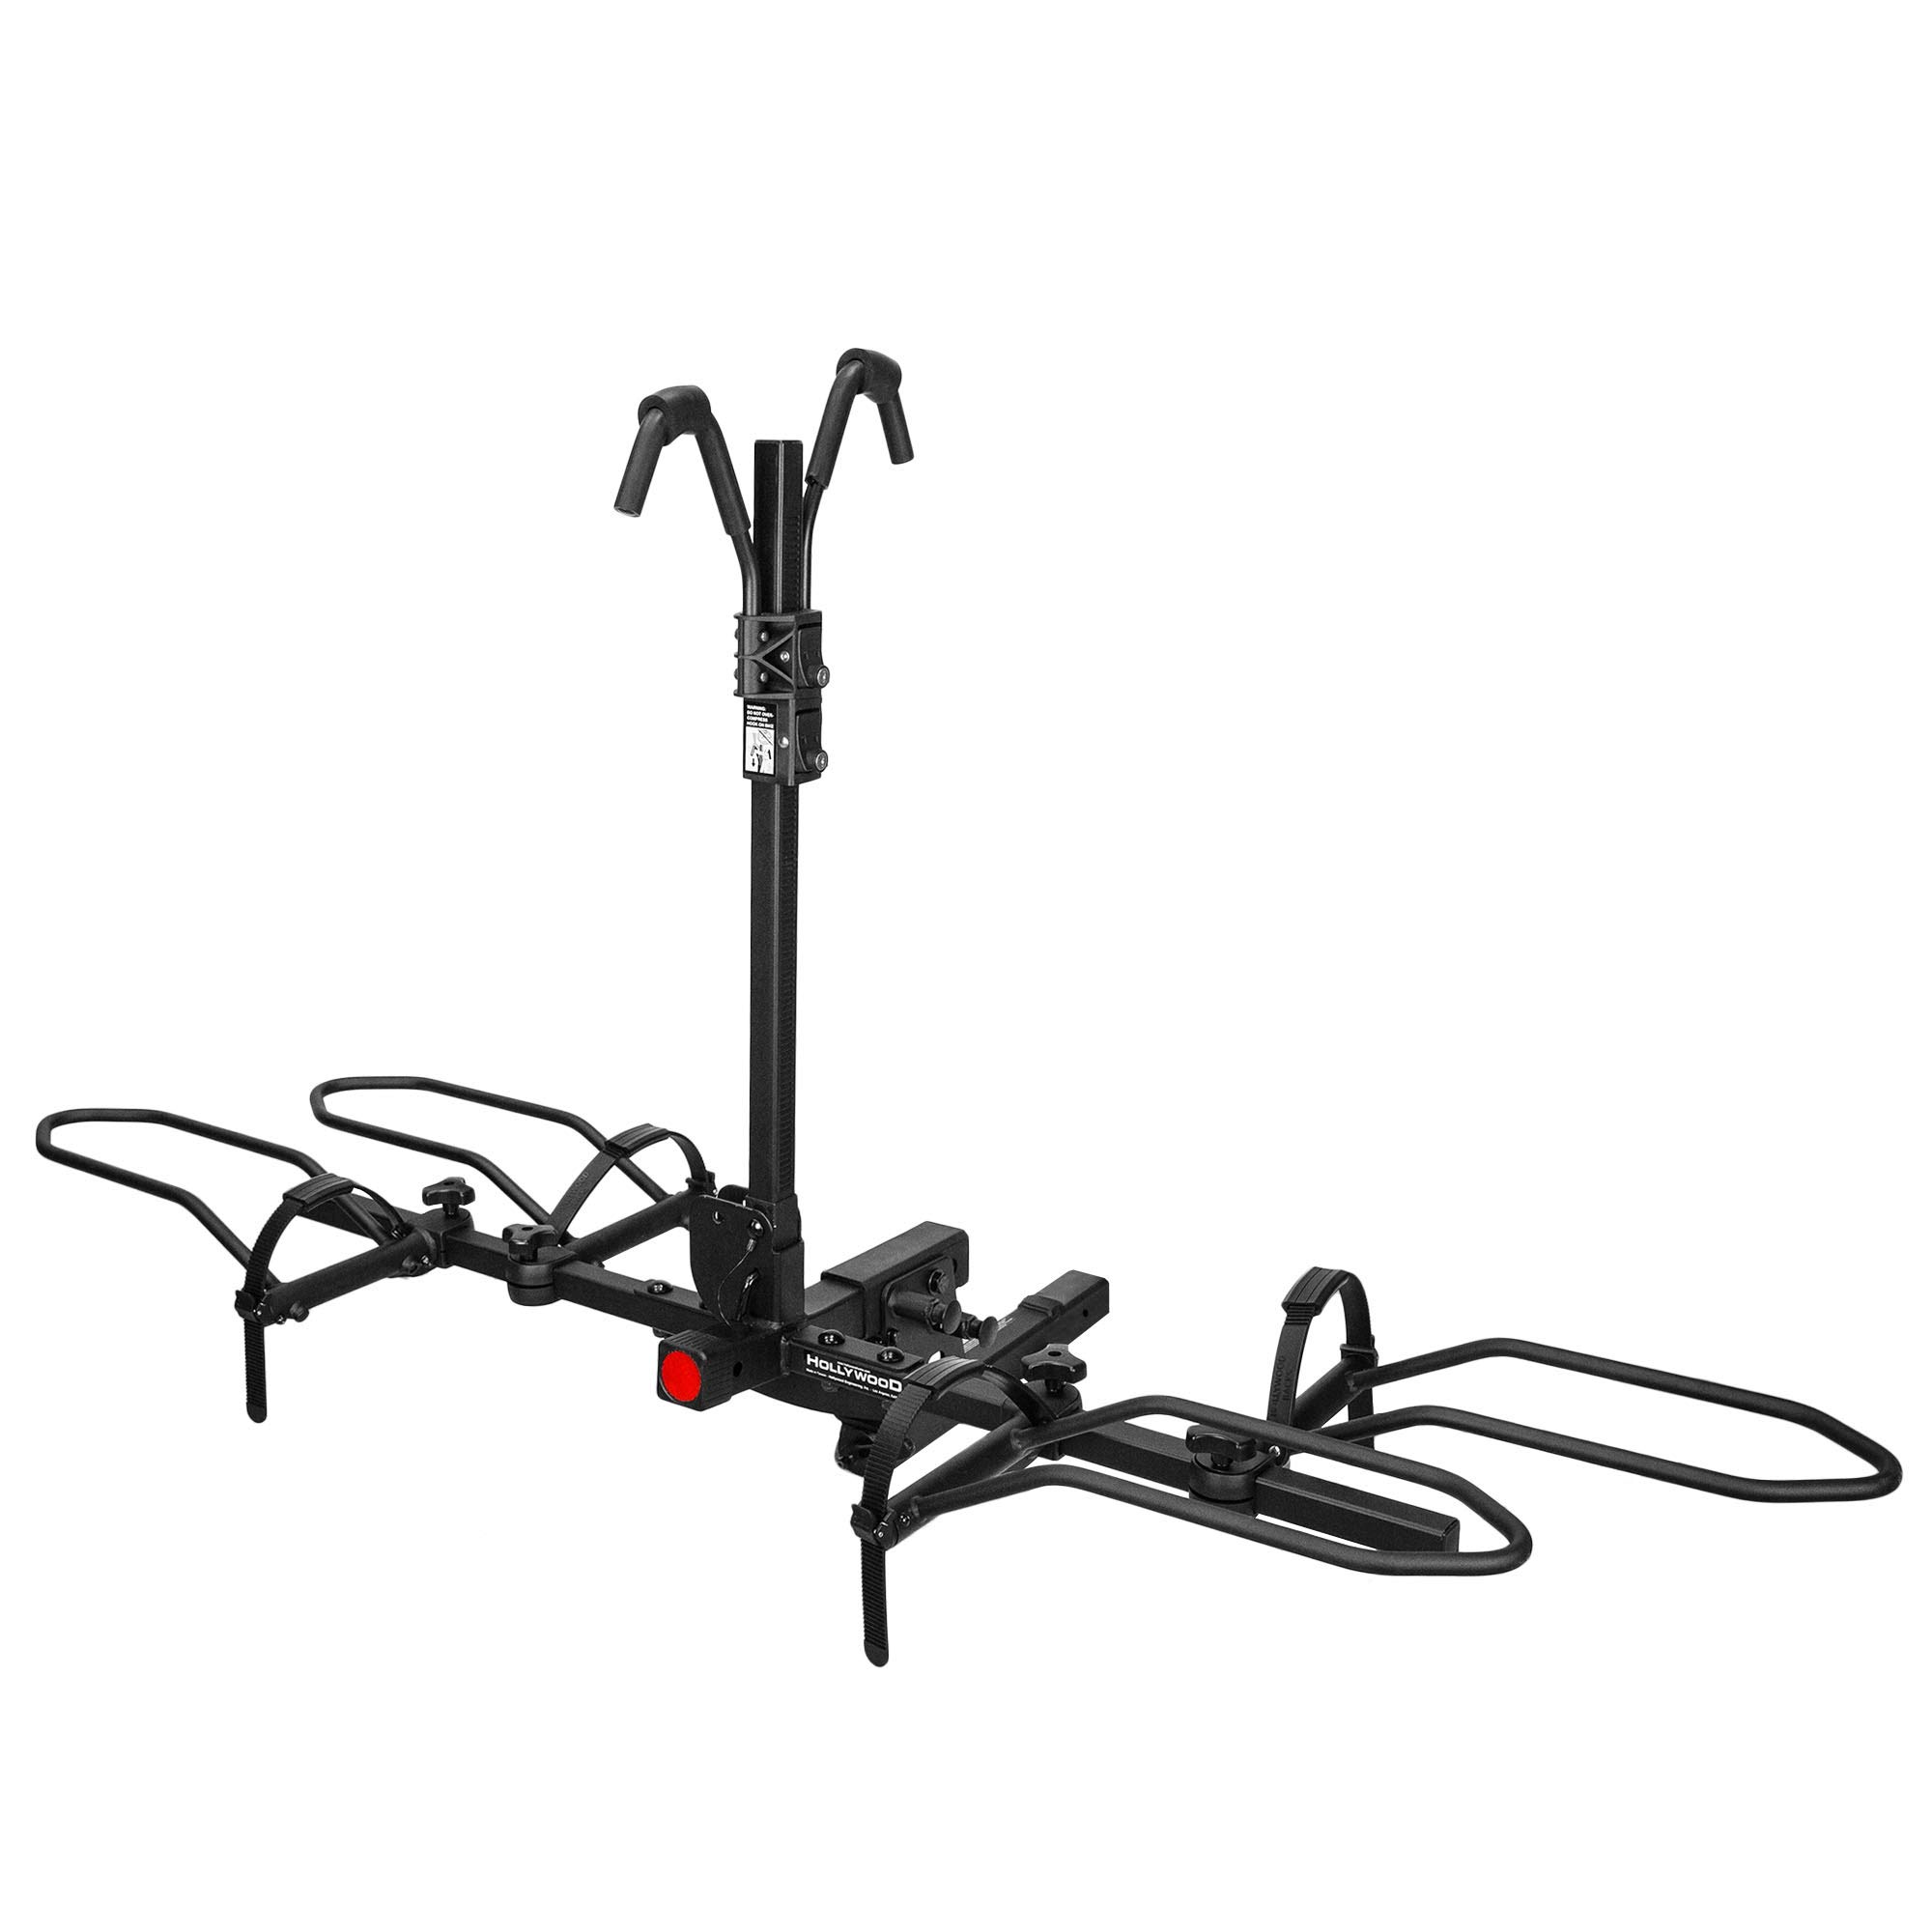 Hollywood Racks Sport Rider 2 Hitch Bike Rack, Carries 2 Bikes Up To 80 Lbs Each For Standard, Fat Tire And Electric Bicycles -